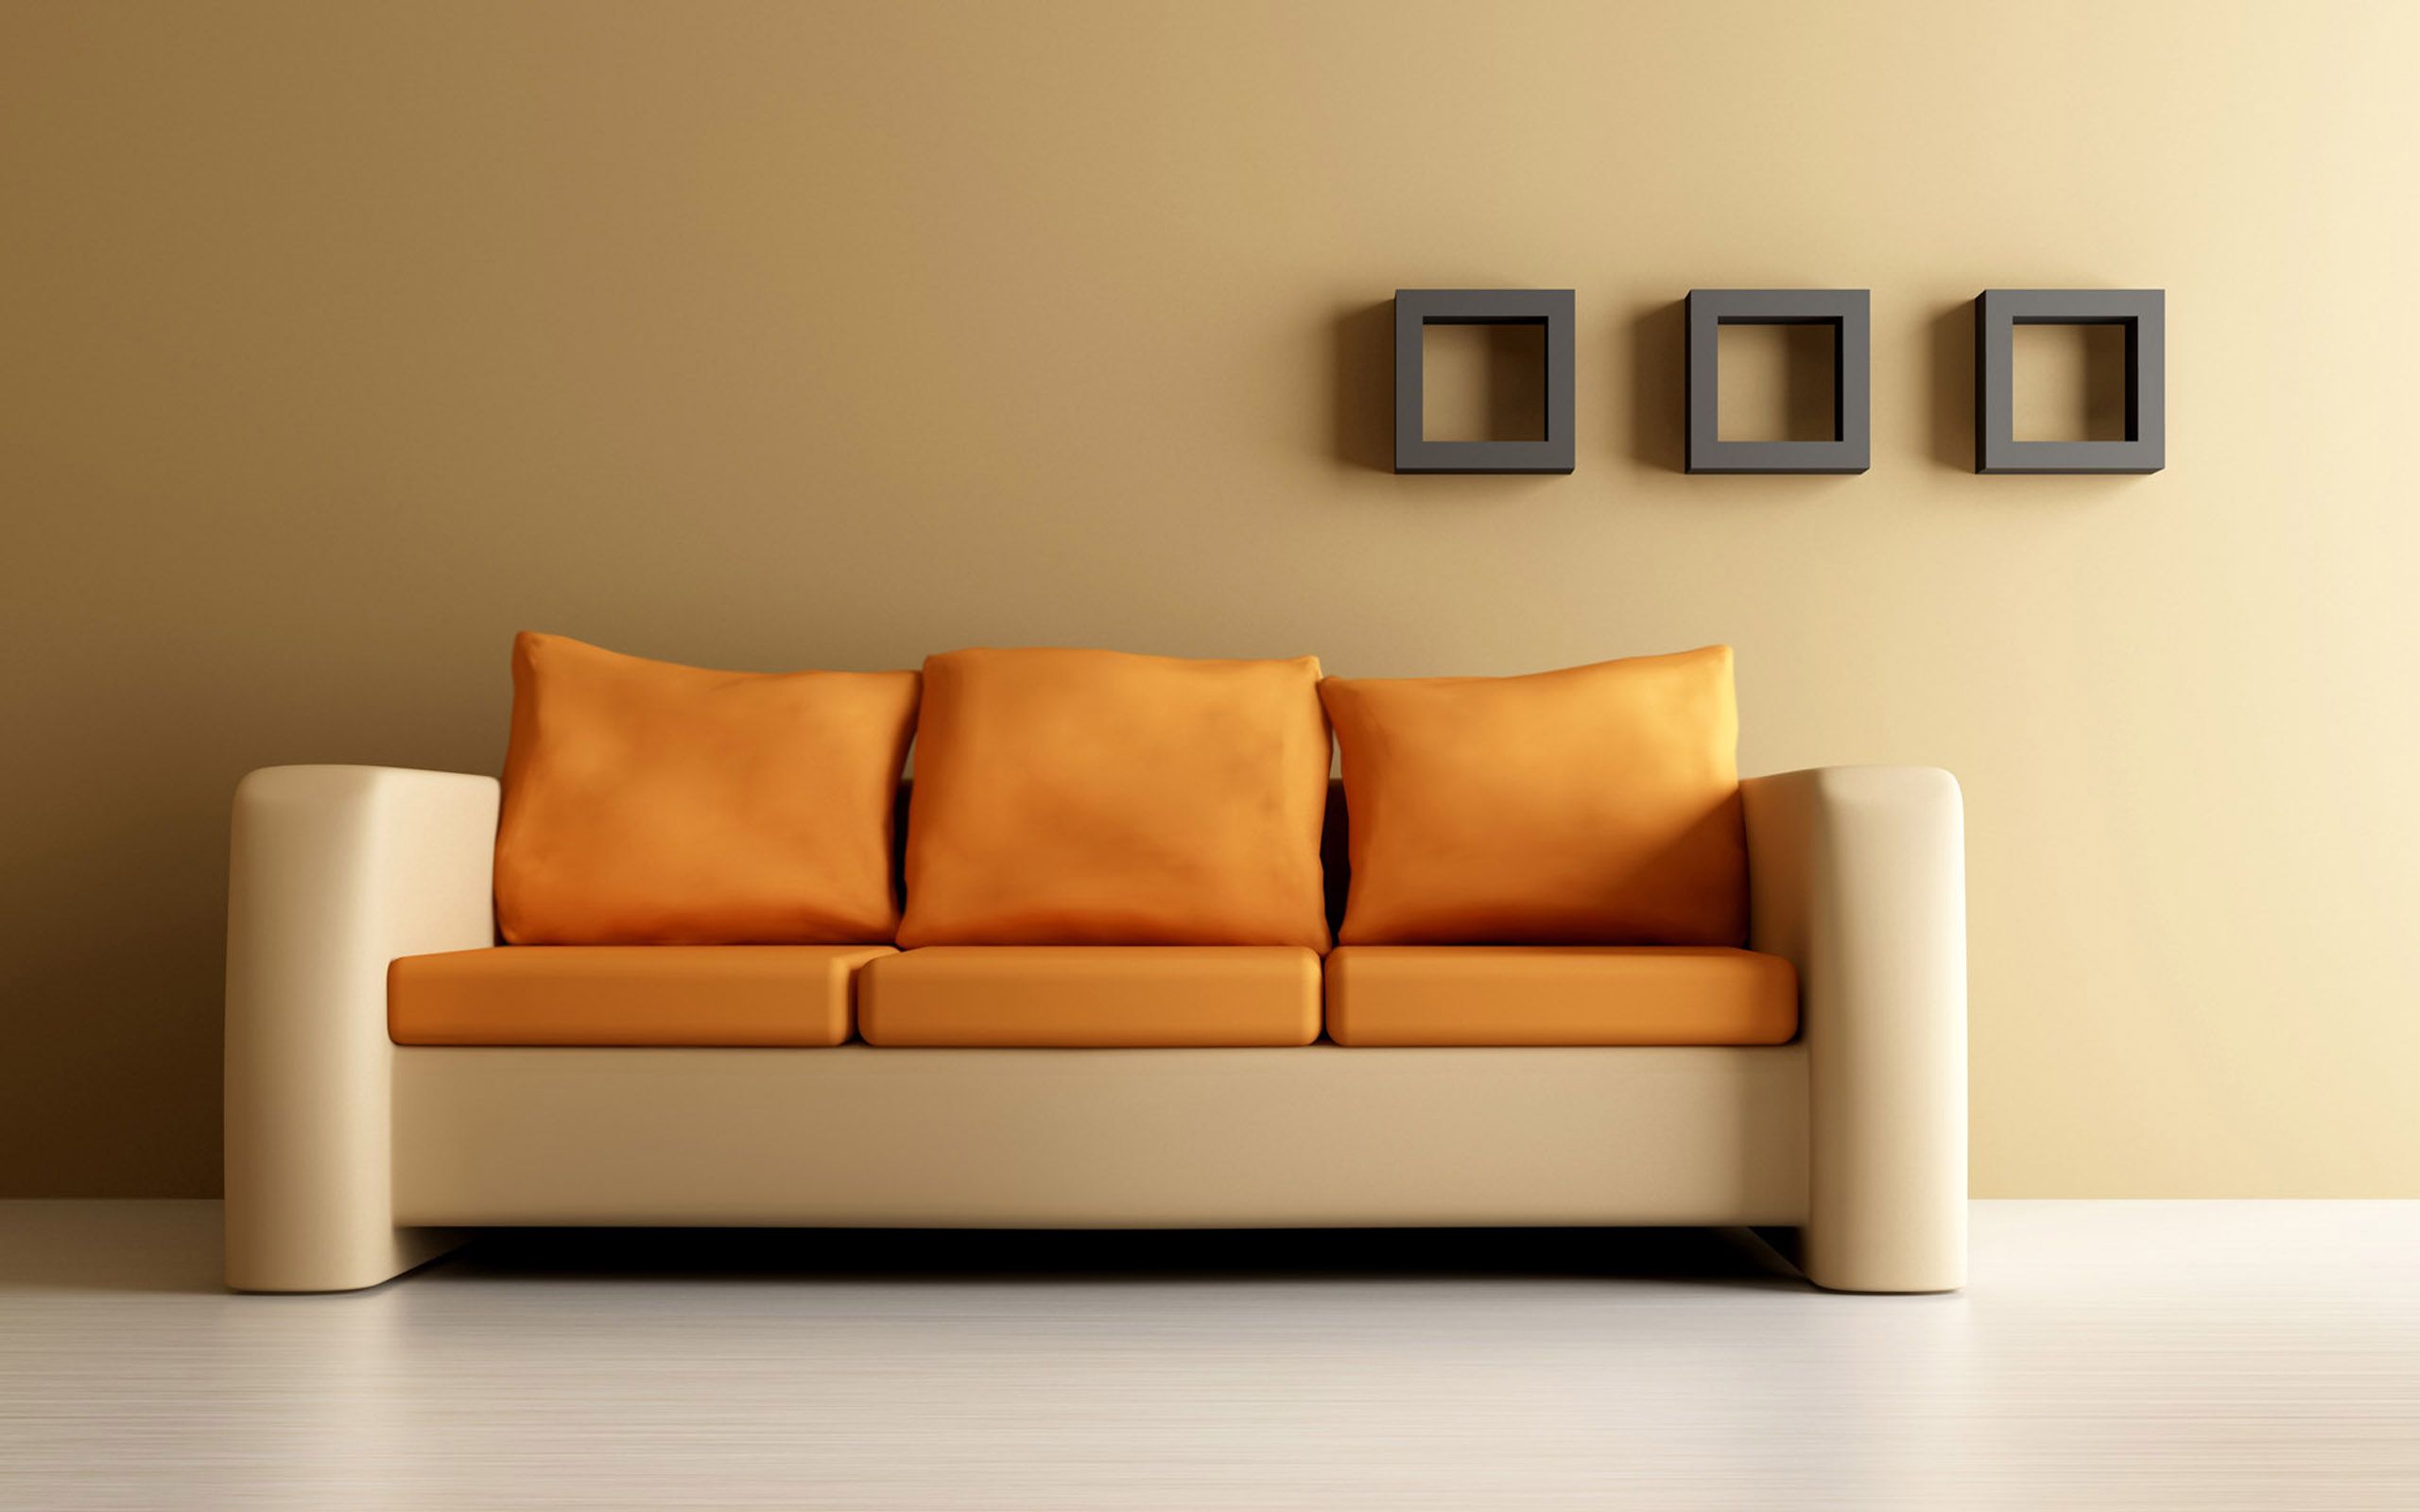 Couch furniture wallpaper 2560x1600 189005 WallpaperUP